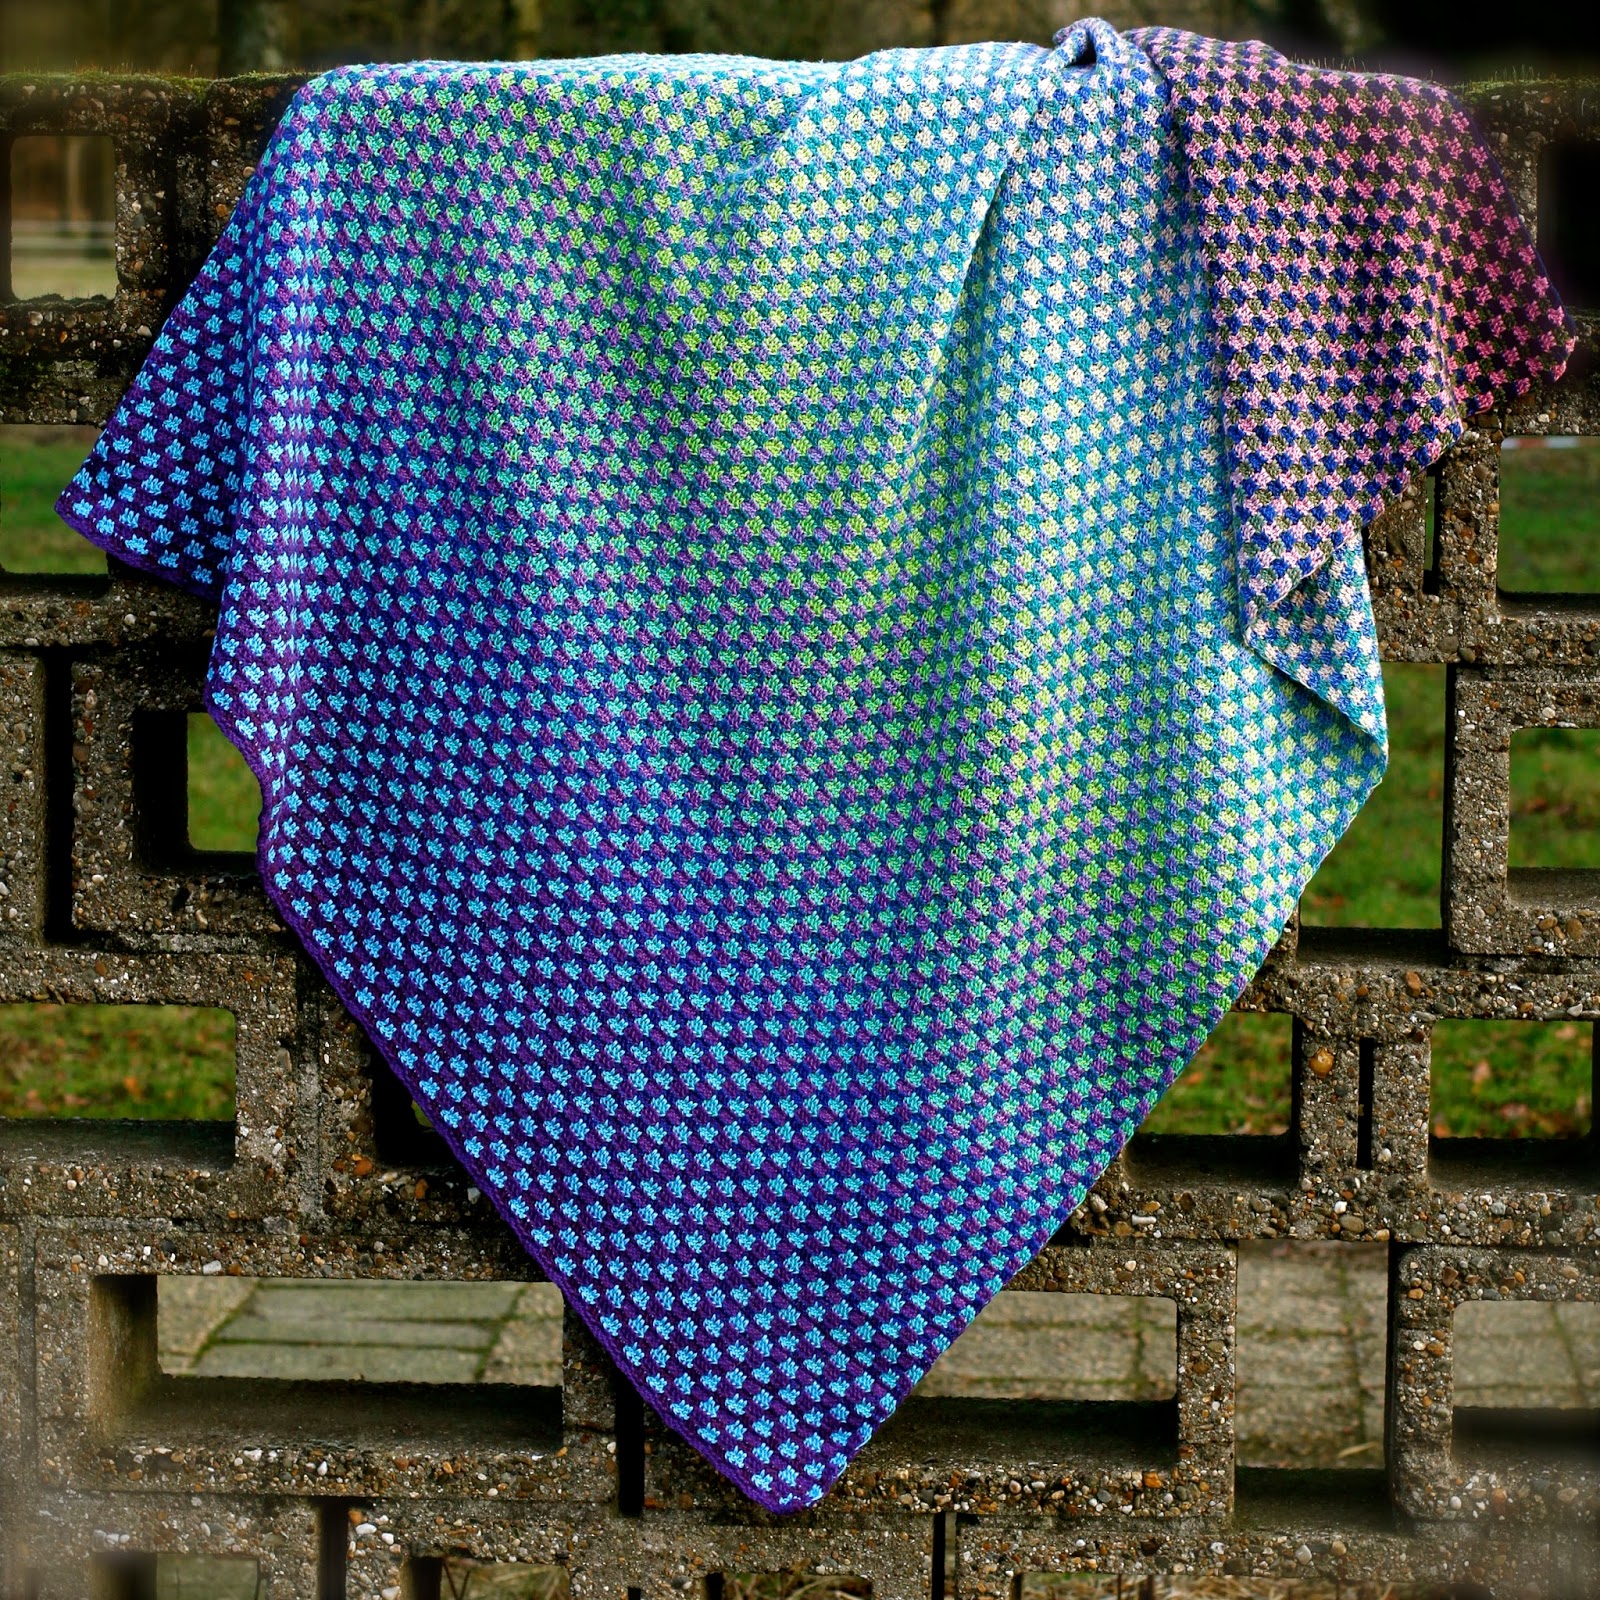 Ravelry: Purple Ombre Security Blanket pattern by Suzanne Carlson